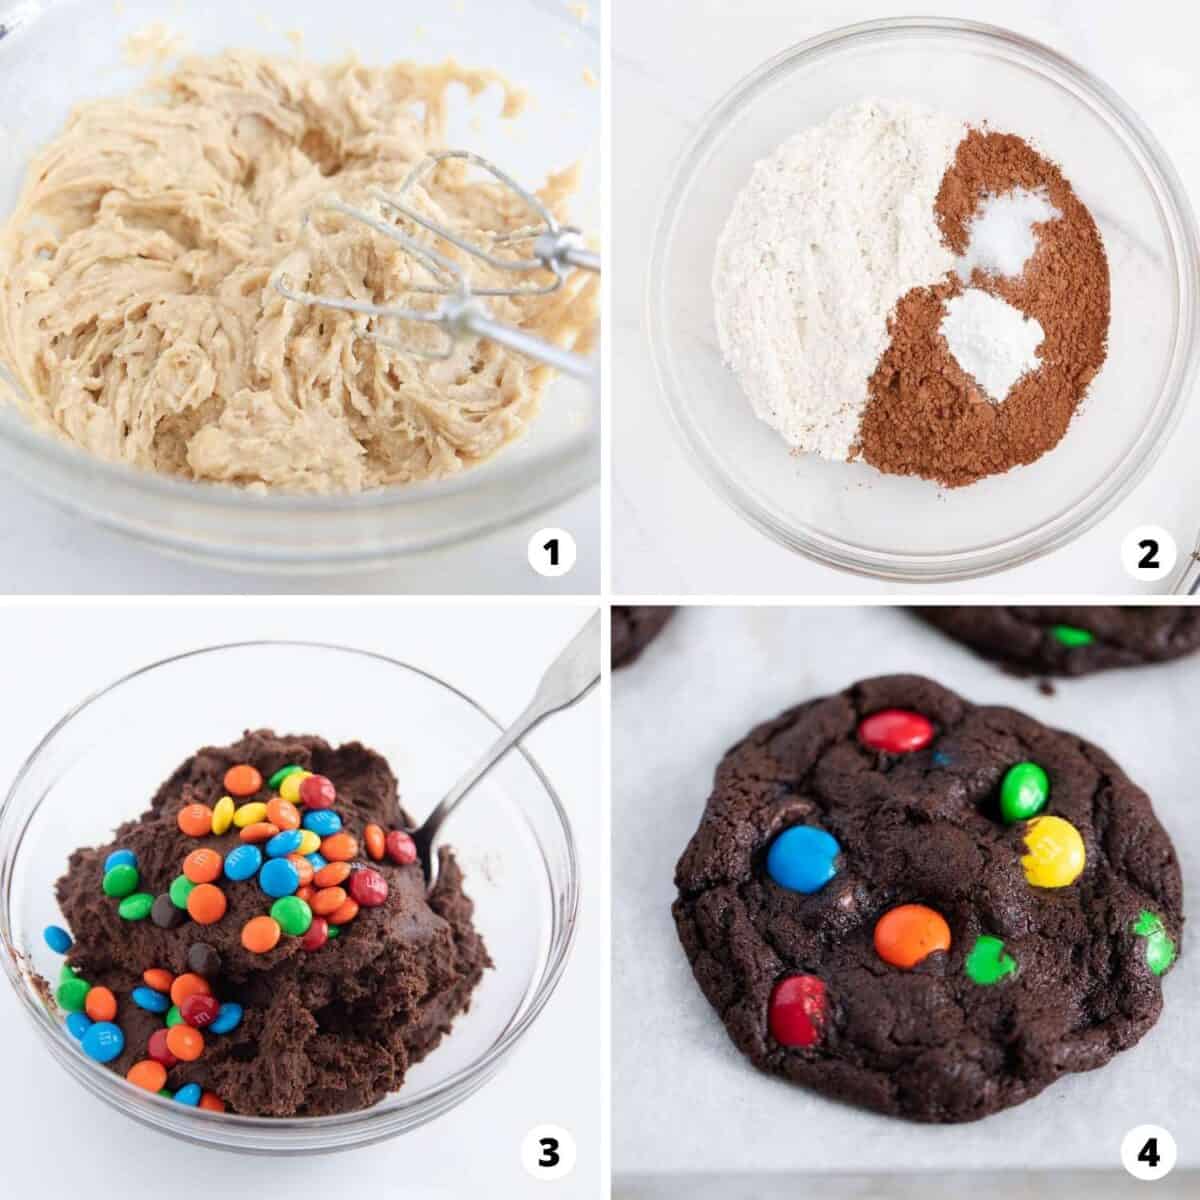 Showing how to make chocolate m&m cookies in a 4 step collage.